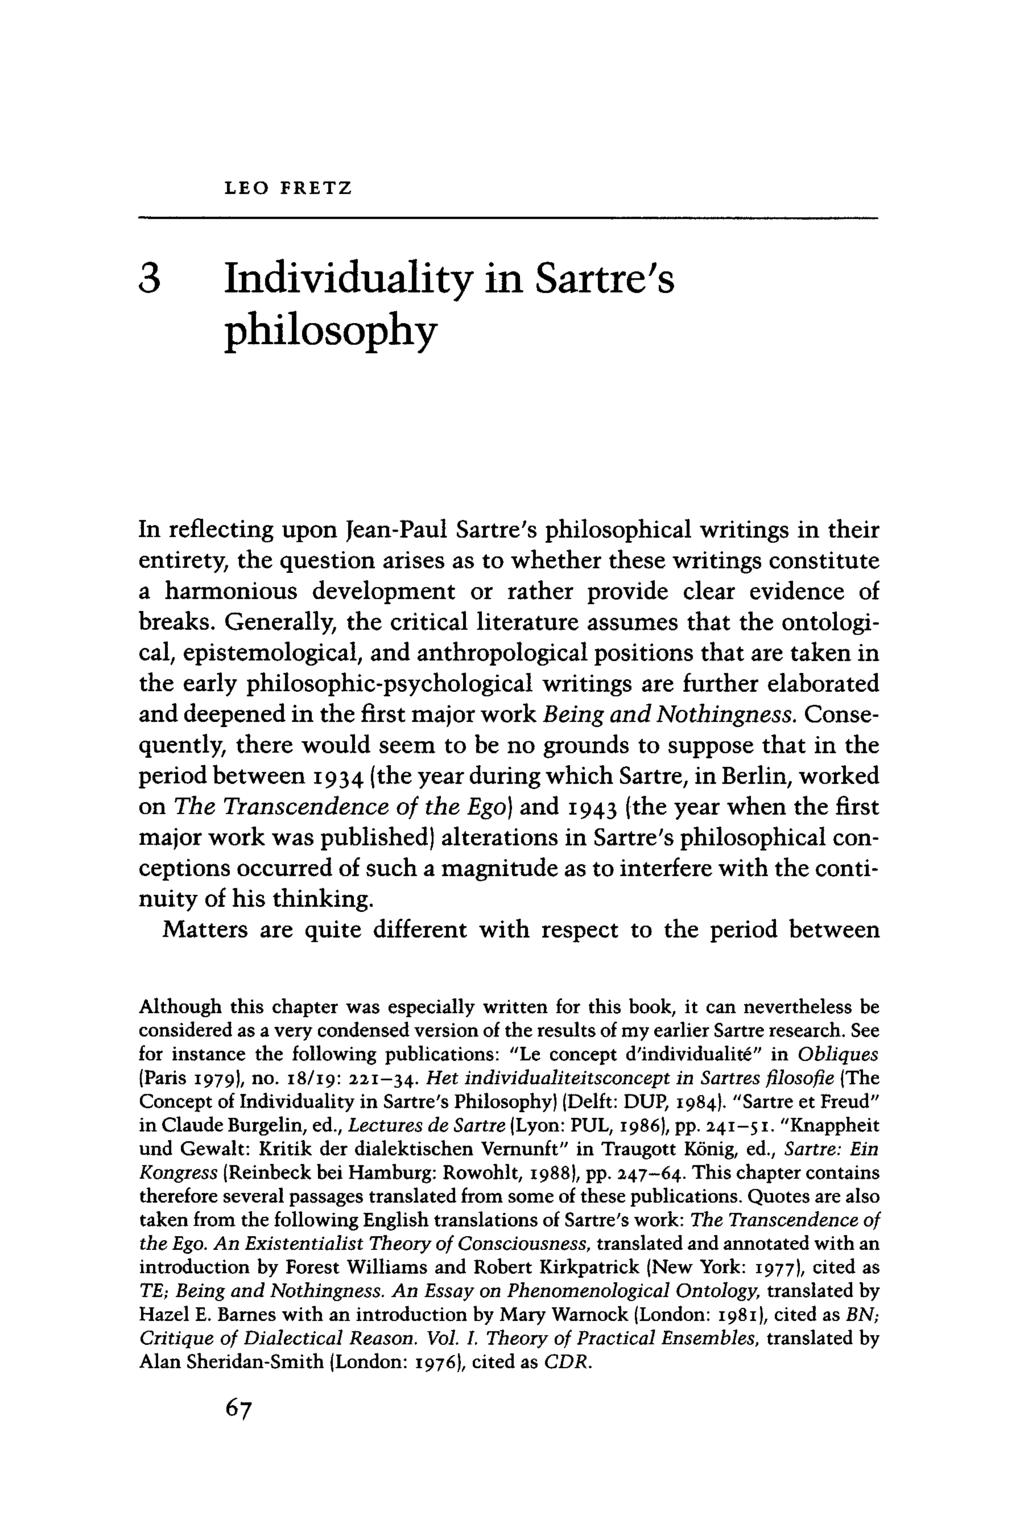 LEO FRETZ 3 Individuality in Sartre ; s philosophy In reflecting upon Jean-Paul Sartre's philosophical writings in their entirety, the question arises as to whether these writings constitute a